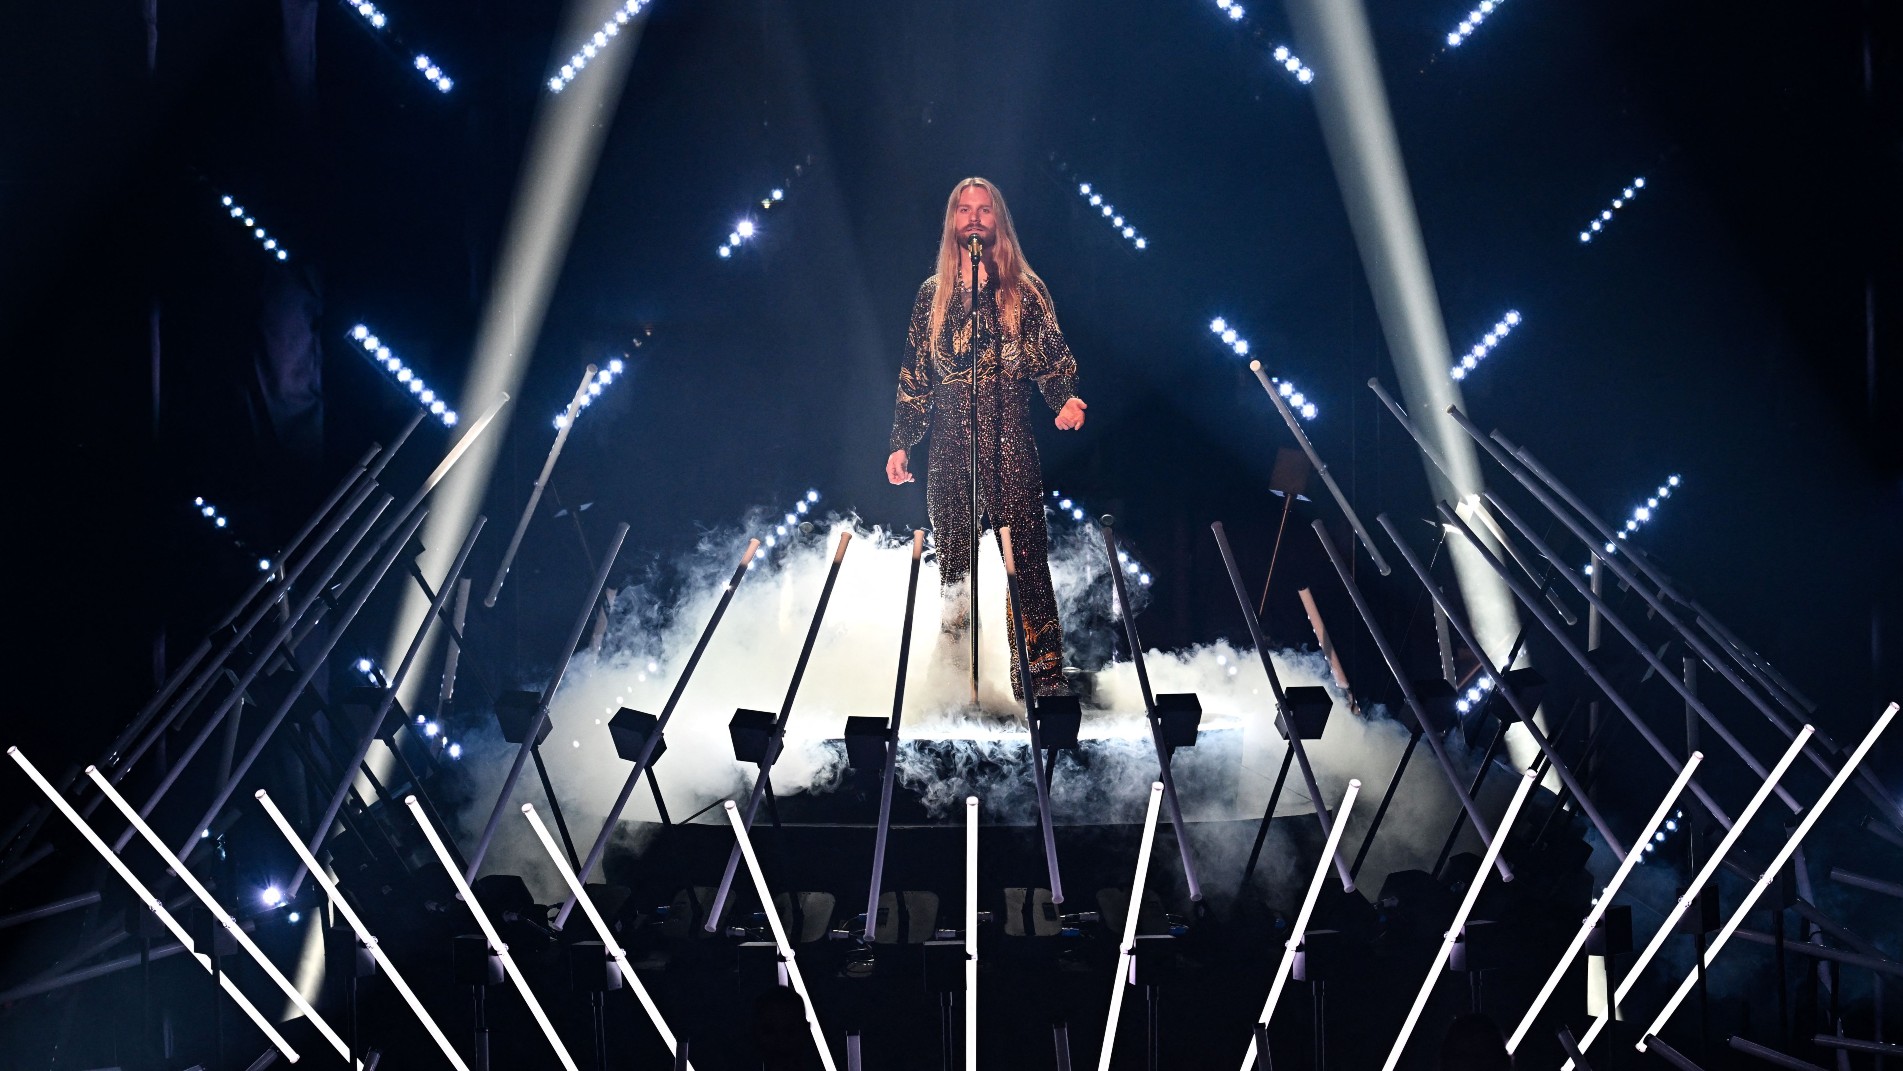 Sam Ryder, the UK Eurovision entrant in 2022, performs during this year’s contest in Liverpool 